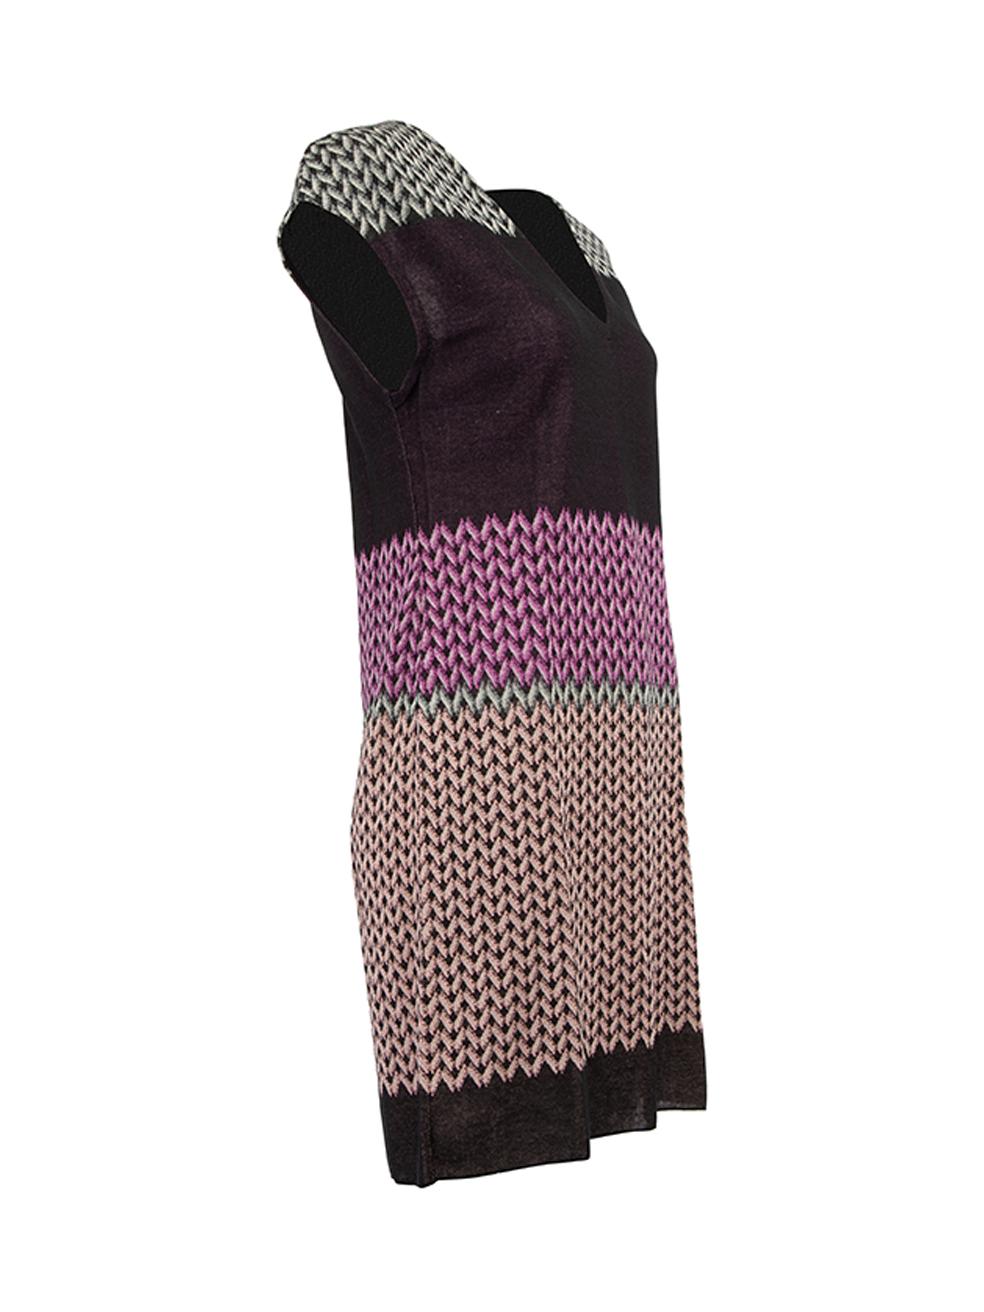 CONDITION is Never Worn. No visible wear to dress is evident on this used Missoni designer resale item. Details Multicolour- Grey, purple and pink Viscose Mini dress Knit print pattern V neckline Made in Italy Composition NO COMPOSITION LABEL BUT